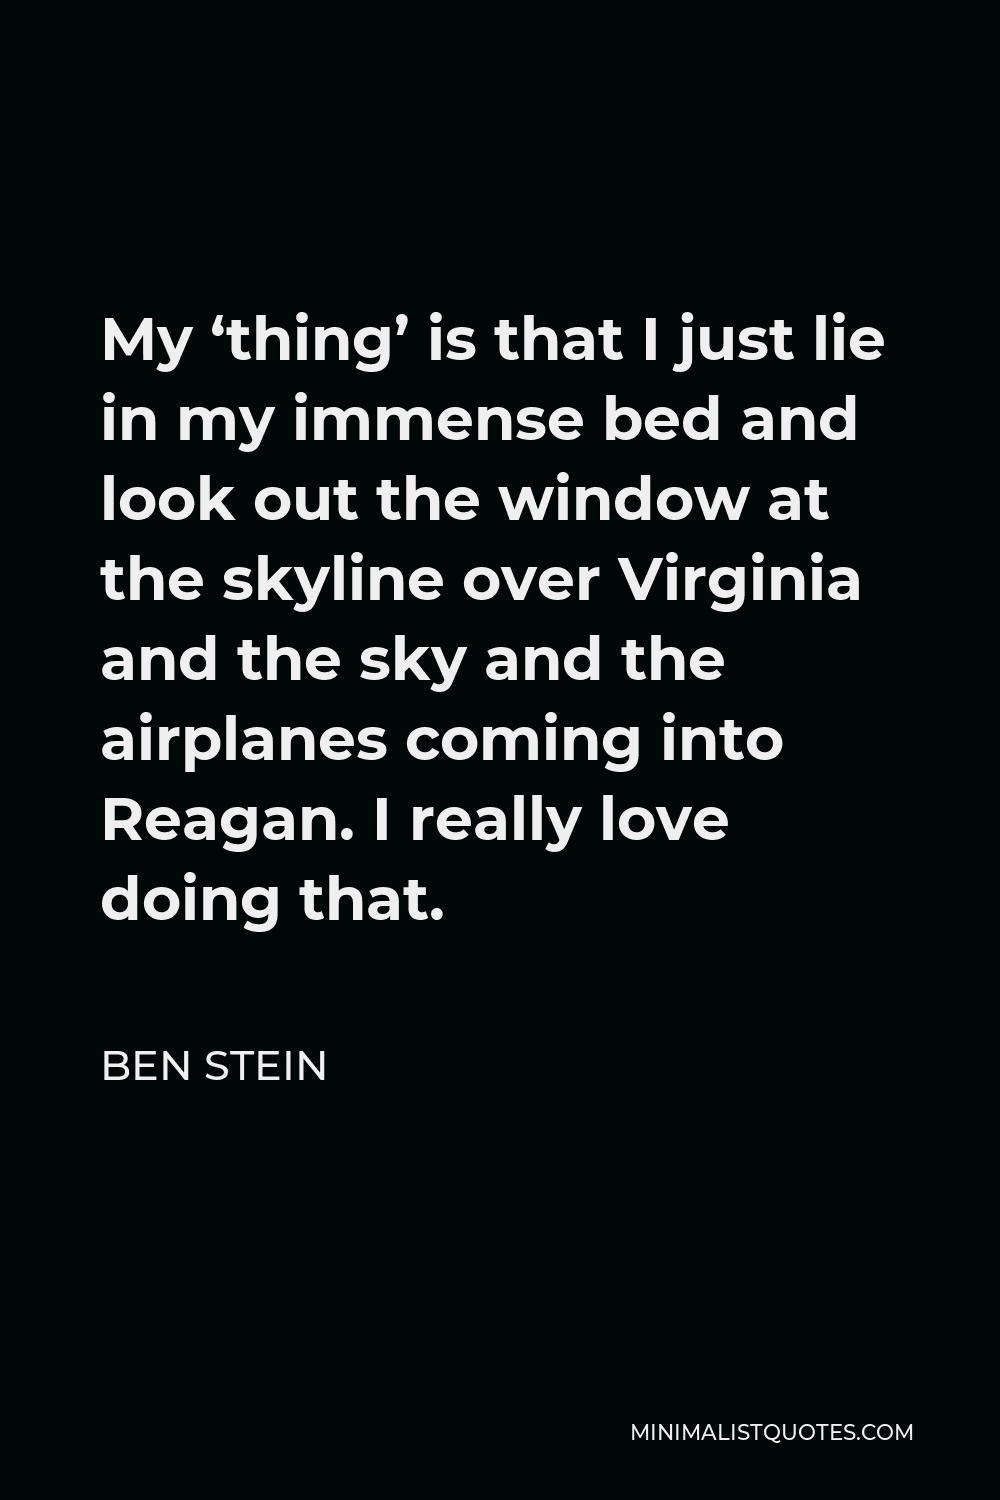 Ben Stein Quote - My ‘thing’ is that I just lie in my immense bed and look out the window at the skyline over Virginia and the sky and the airplanes coming into Reagan. I really love doing that.